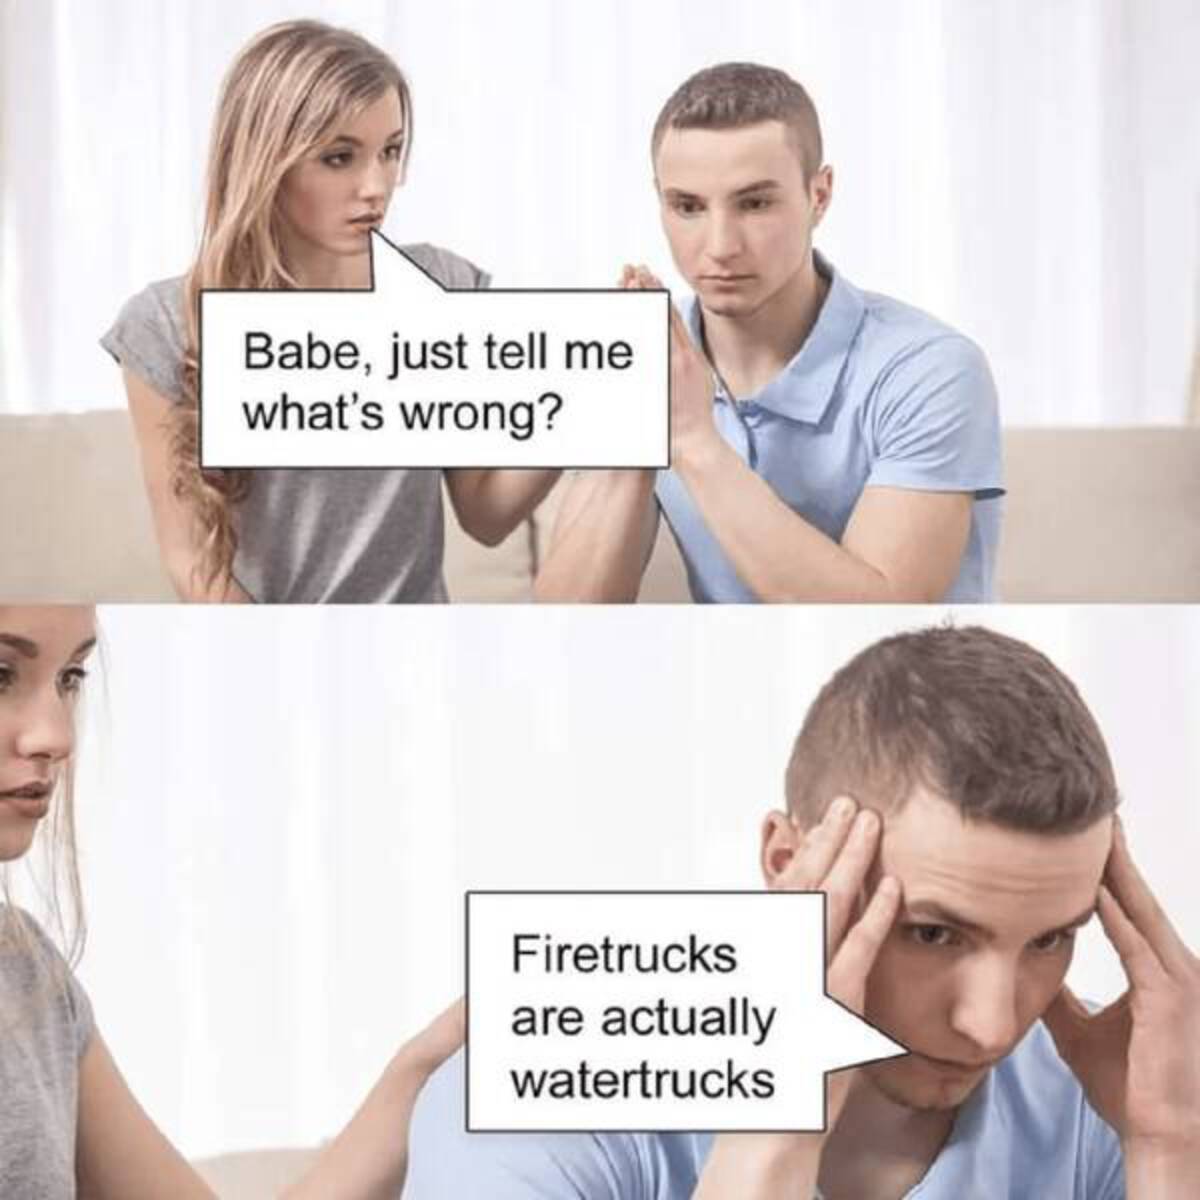 shoulder - Babe, just tell me what's wrong? Firetrucks are actually watertrucks